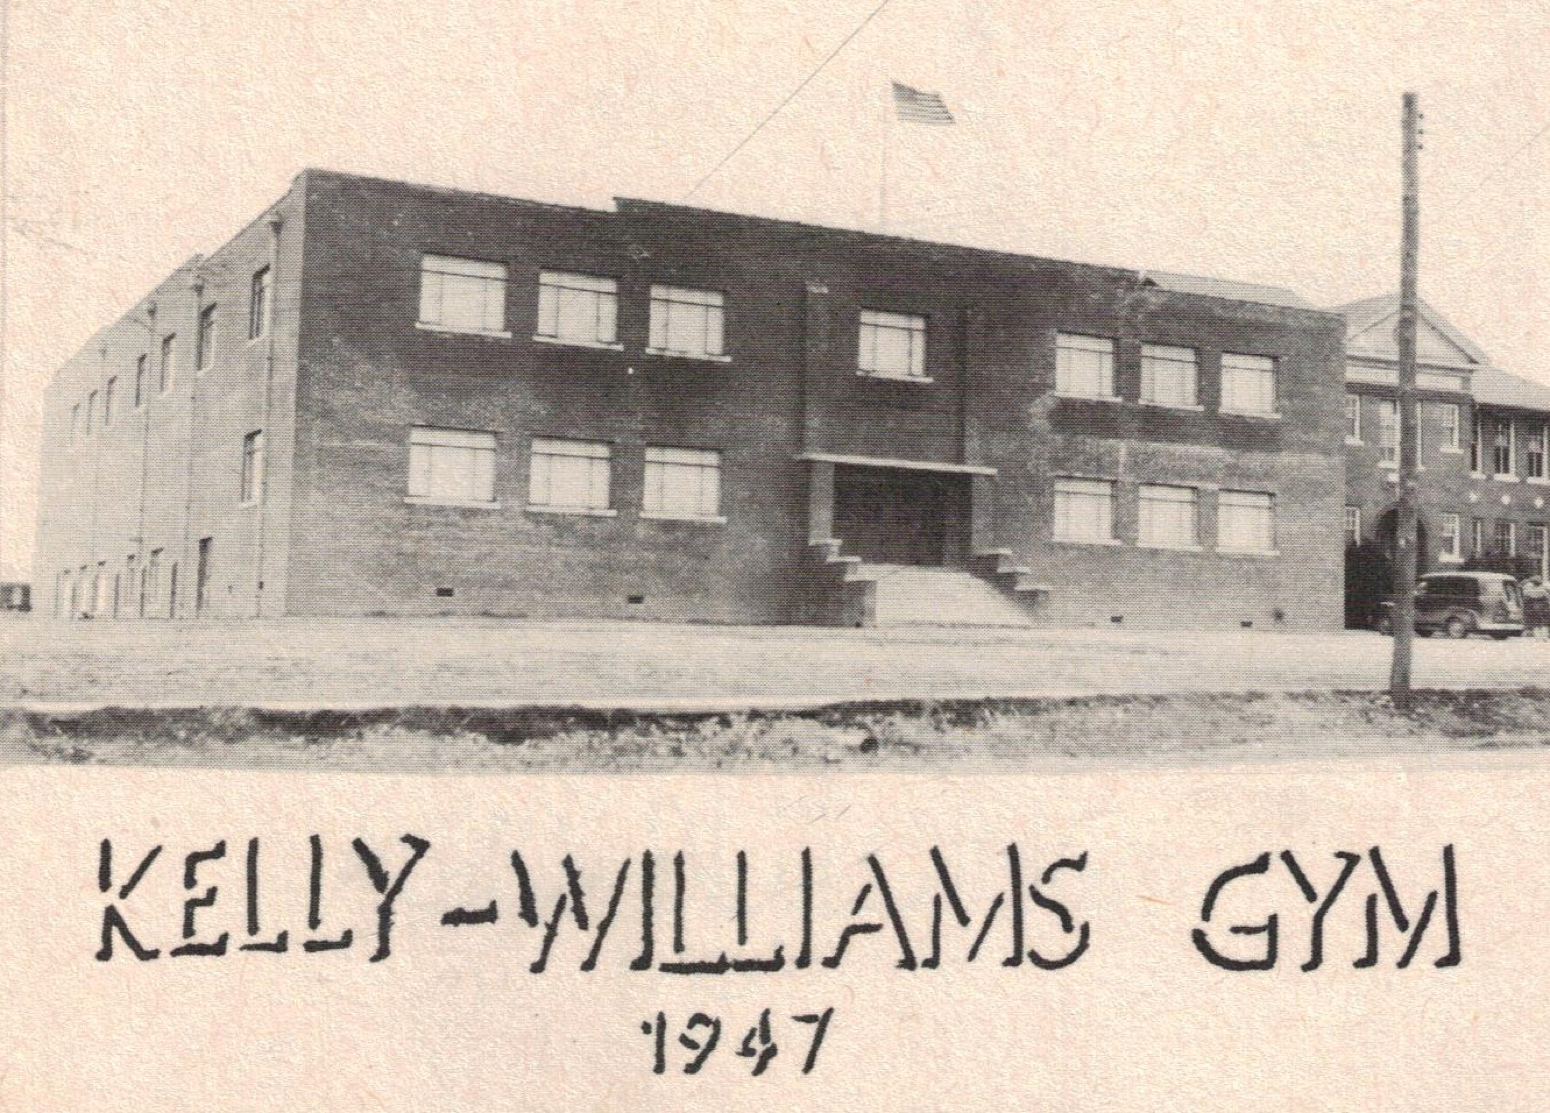 Old Image of Kelly-Williams Gym in 1947